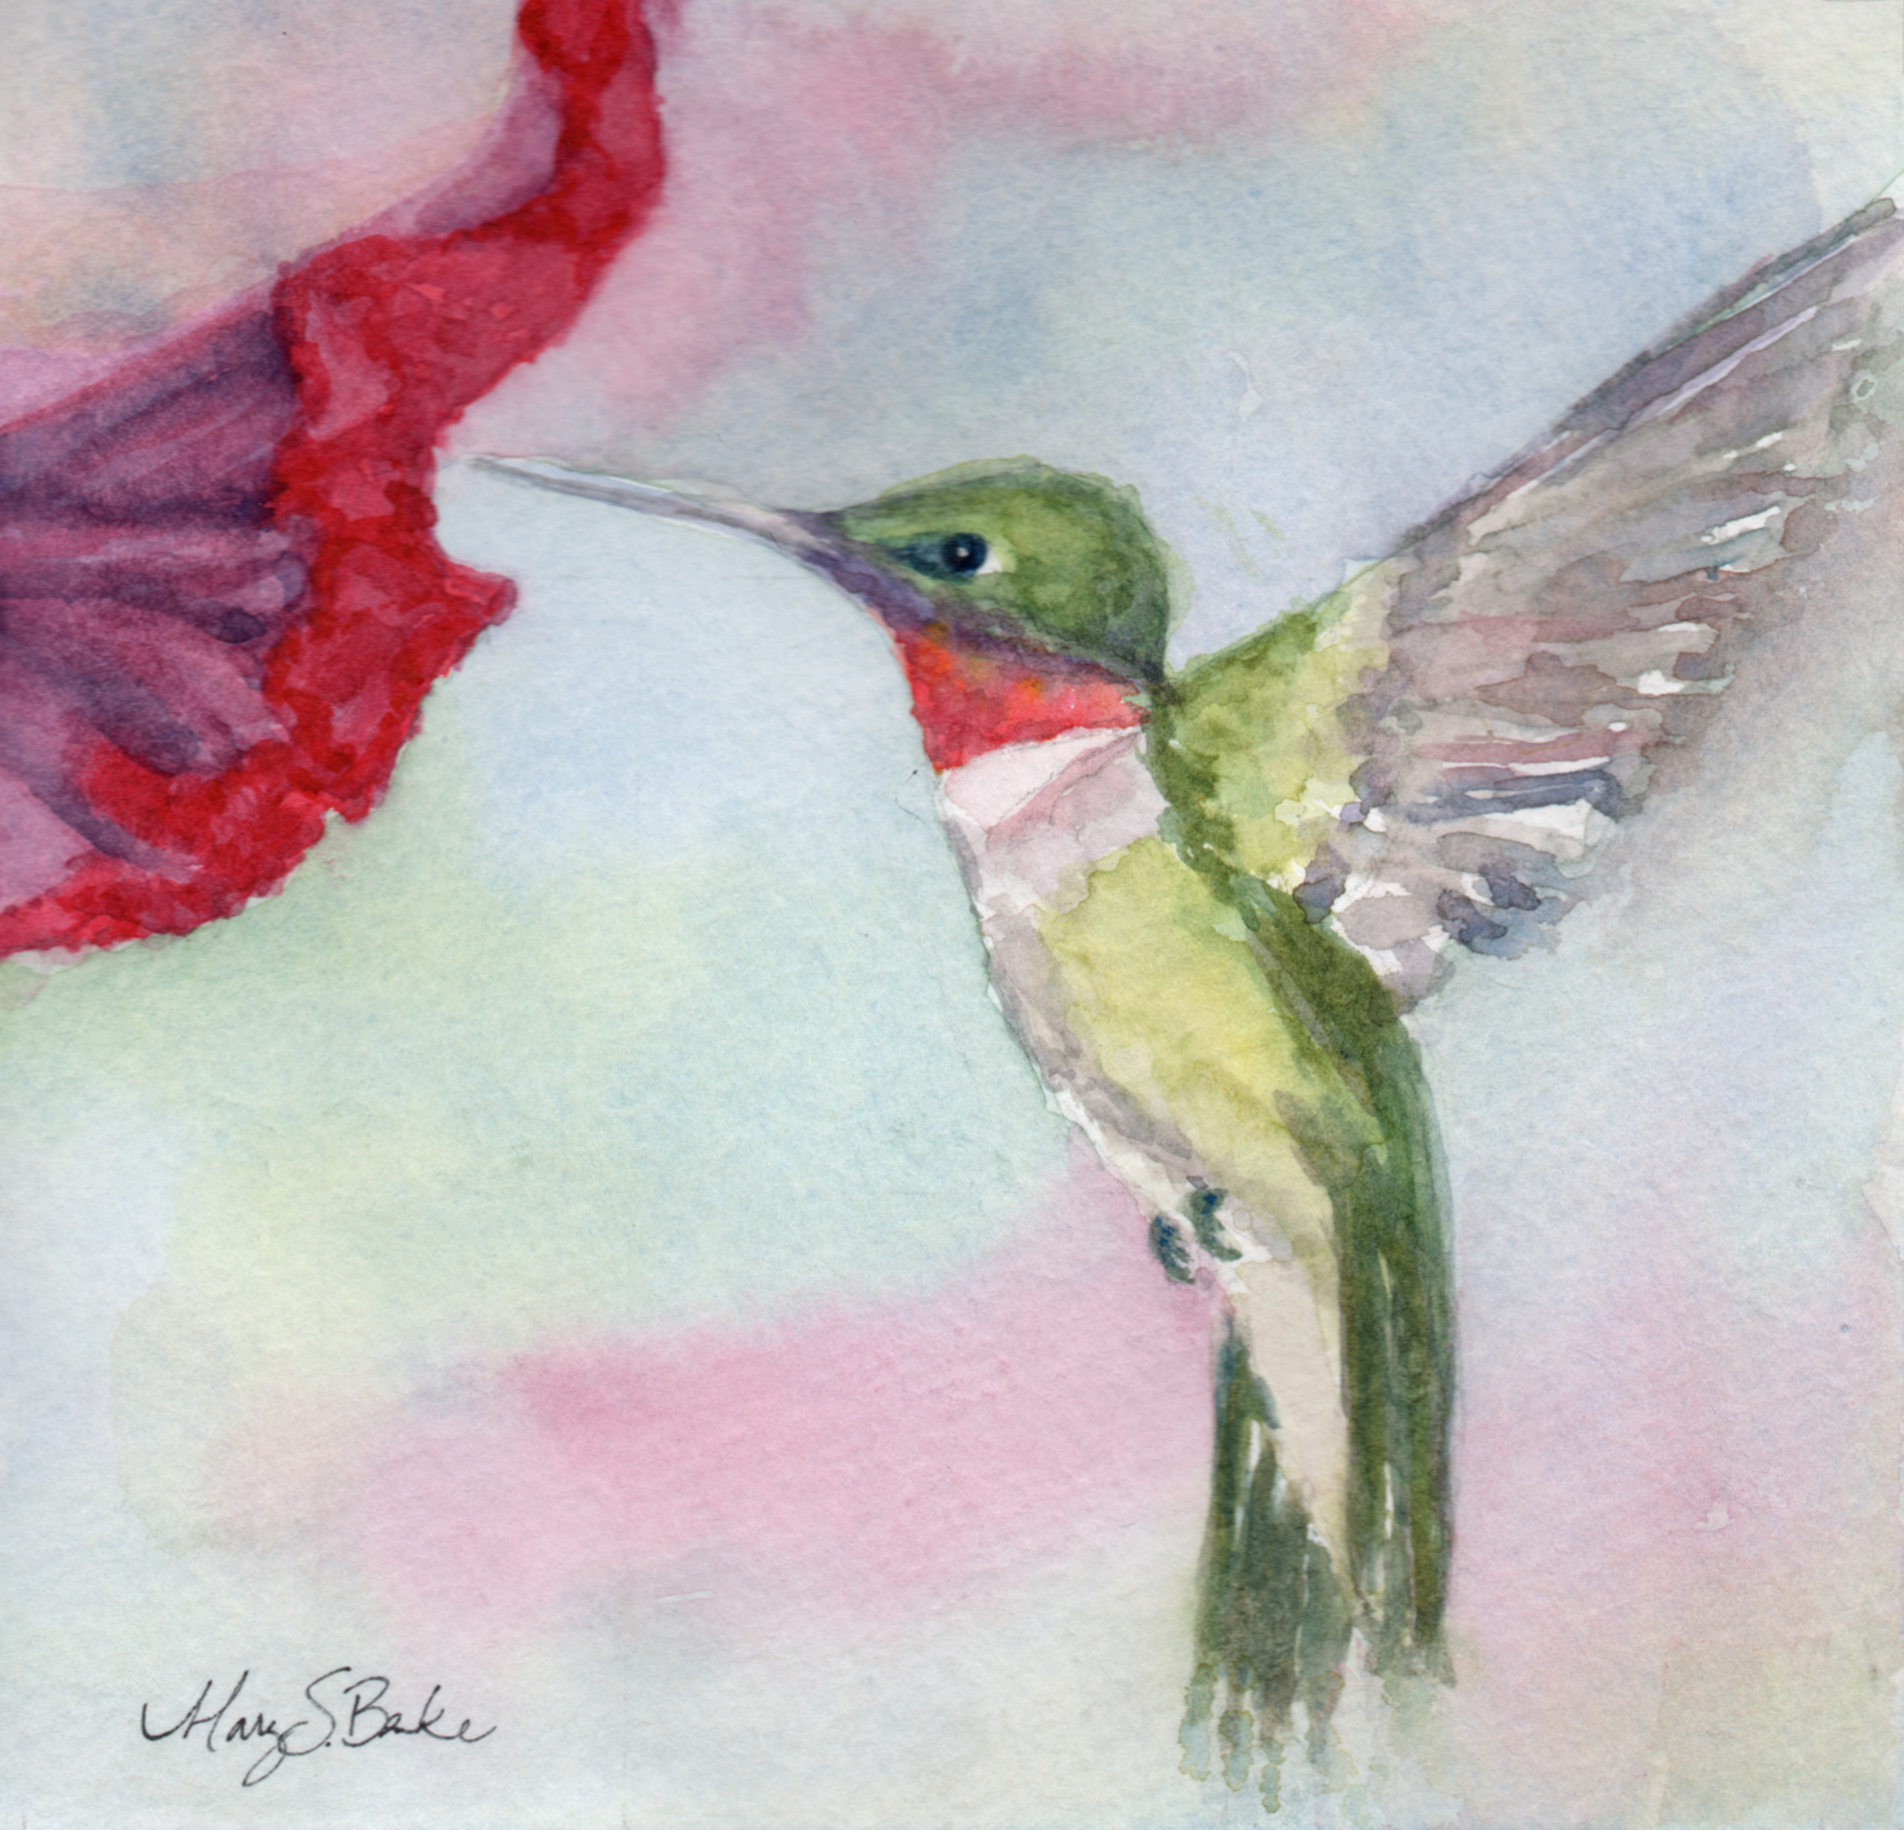 A delicate ruby-throated hummingbird hovers near a petunia in this sweet watercolor portrait in a square format by Mary Benke